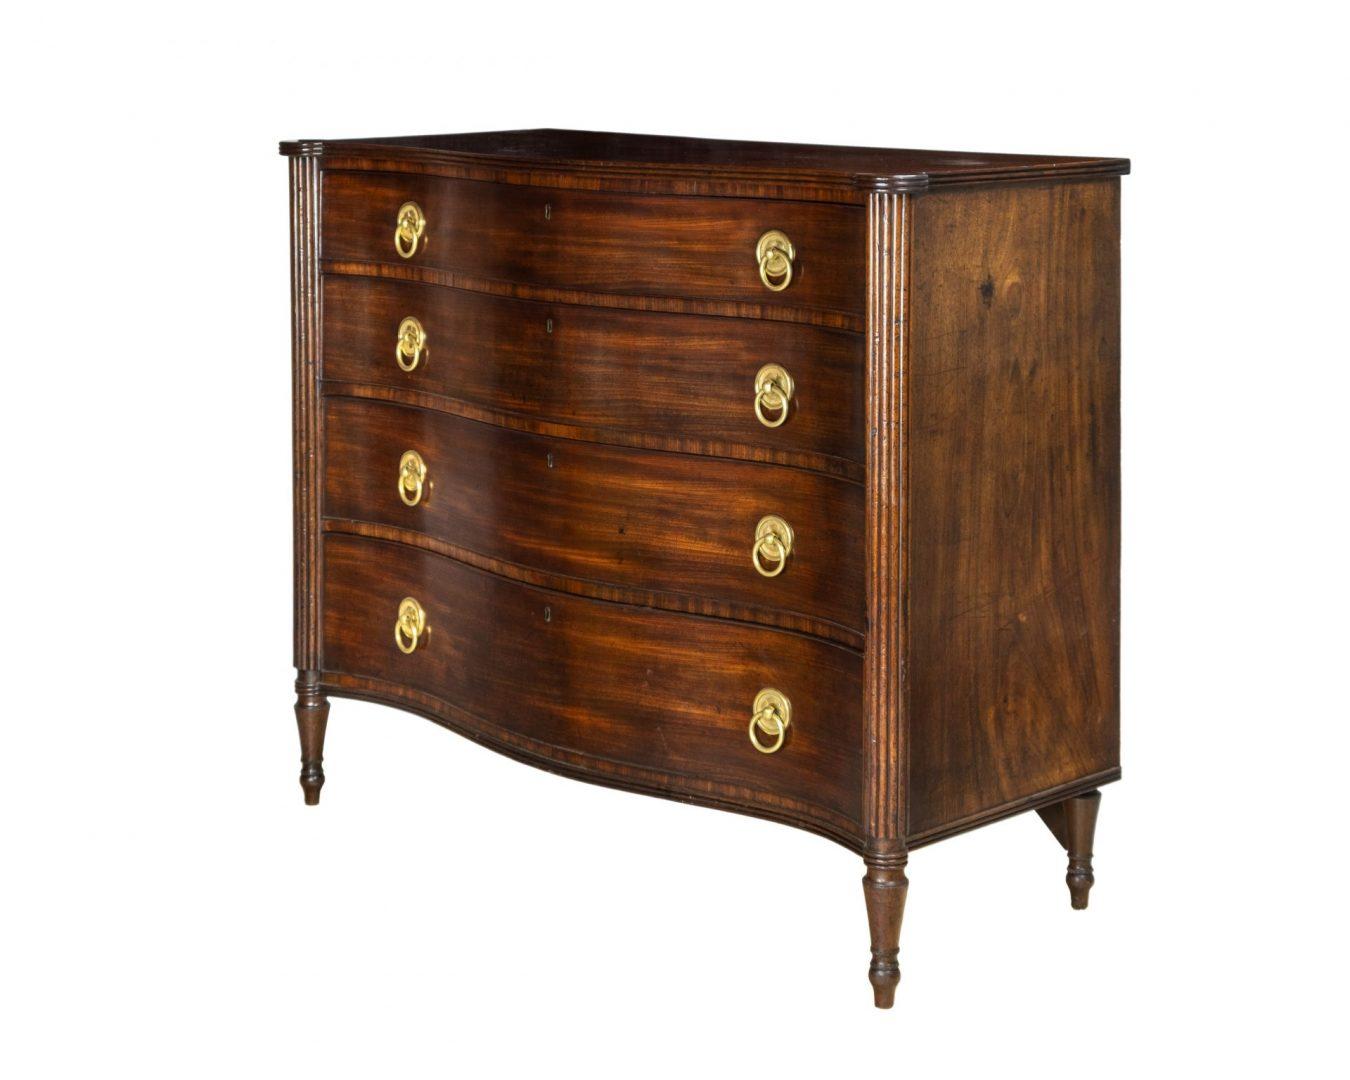 Regency, a good quality mahogany serpentine chest of drawers with reeded corner columns, the handles are very typical of handles seen in the Channel Islands.
This chest has been made with the finest mahogany available at the time using highly